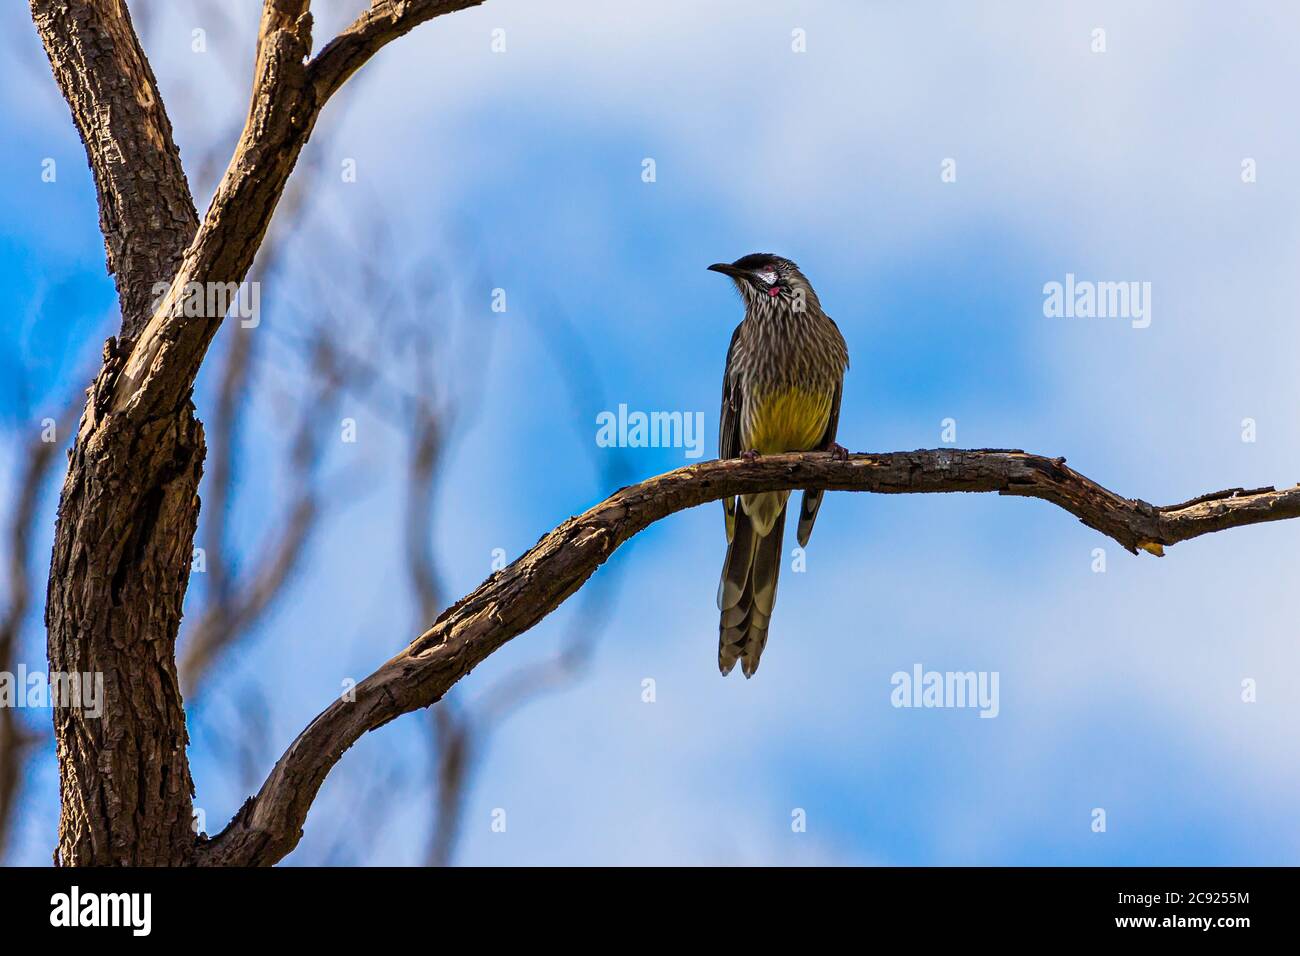 A Red Wattle Bird in a tree Stock Photo